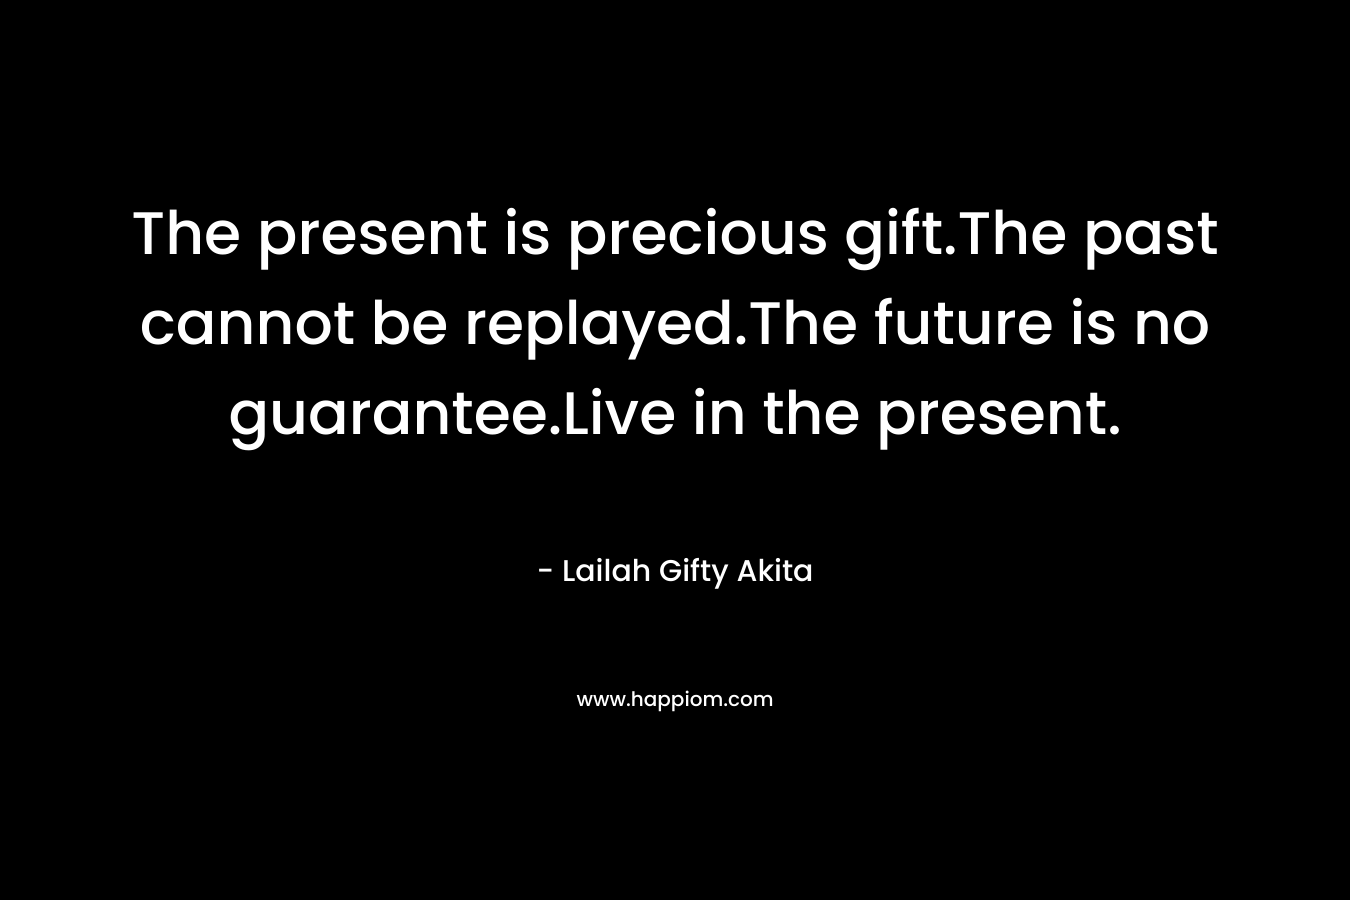 The present is precious gift.The past cannot be replayed.The future is no guarantee.Live in the present.